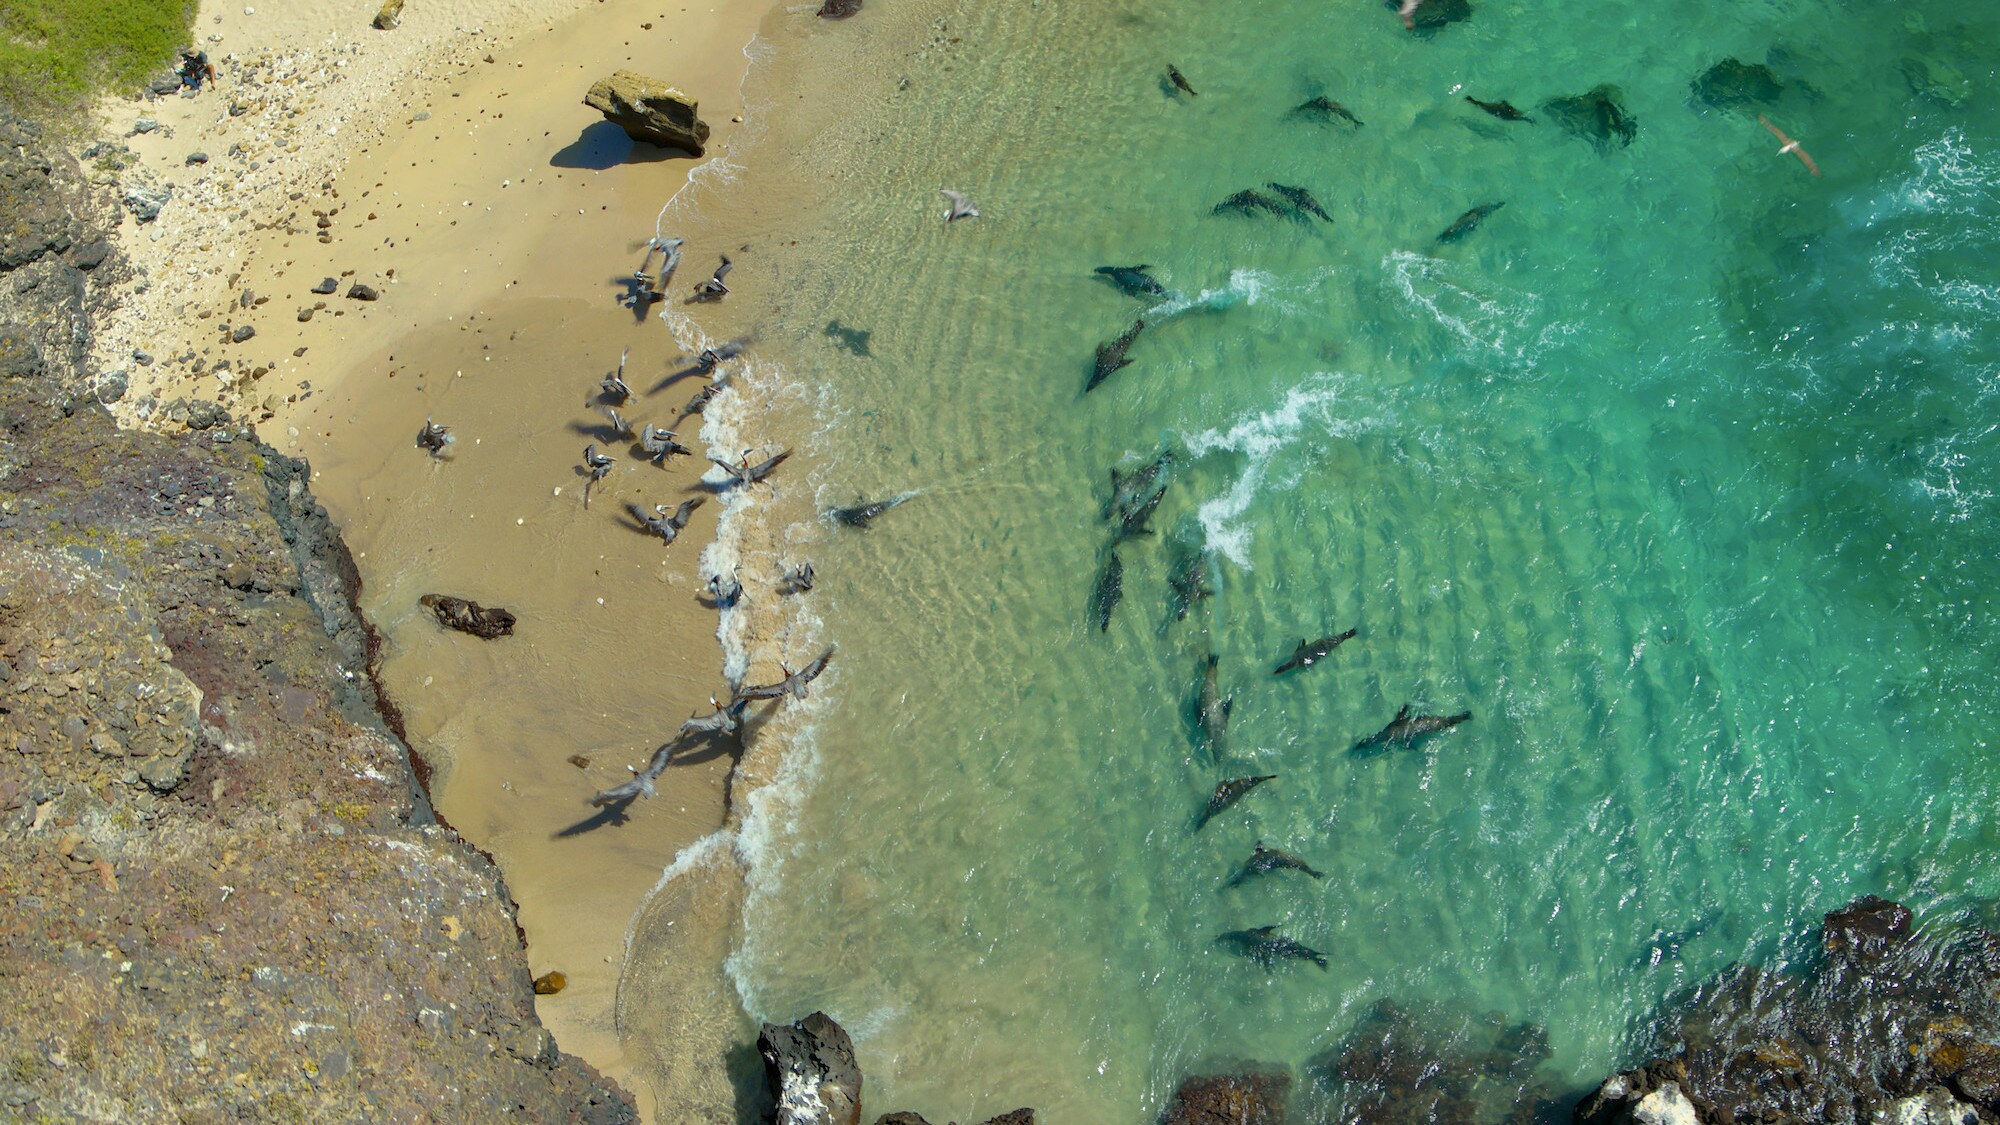 Sea lions lying on the beach and swimming in the water. (National Geographic for Disney+/Bertie Gregory)